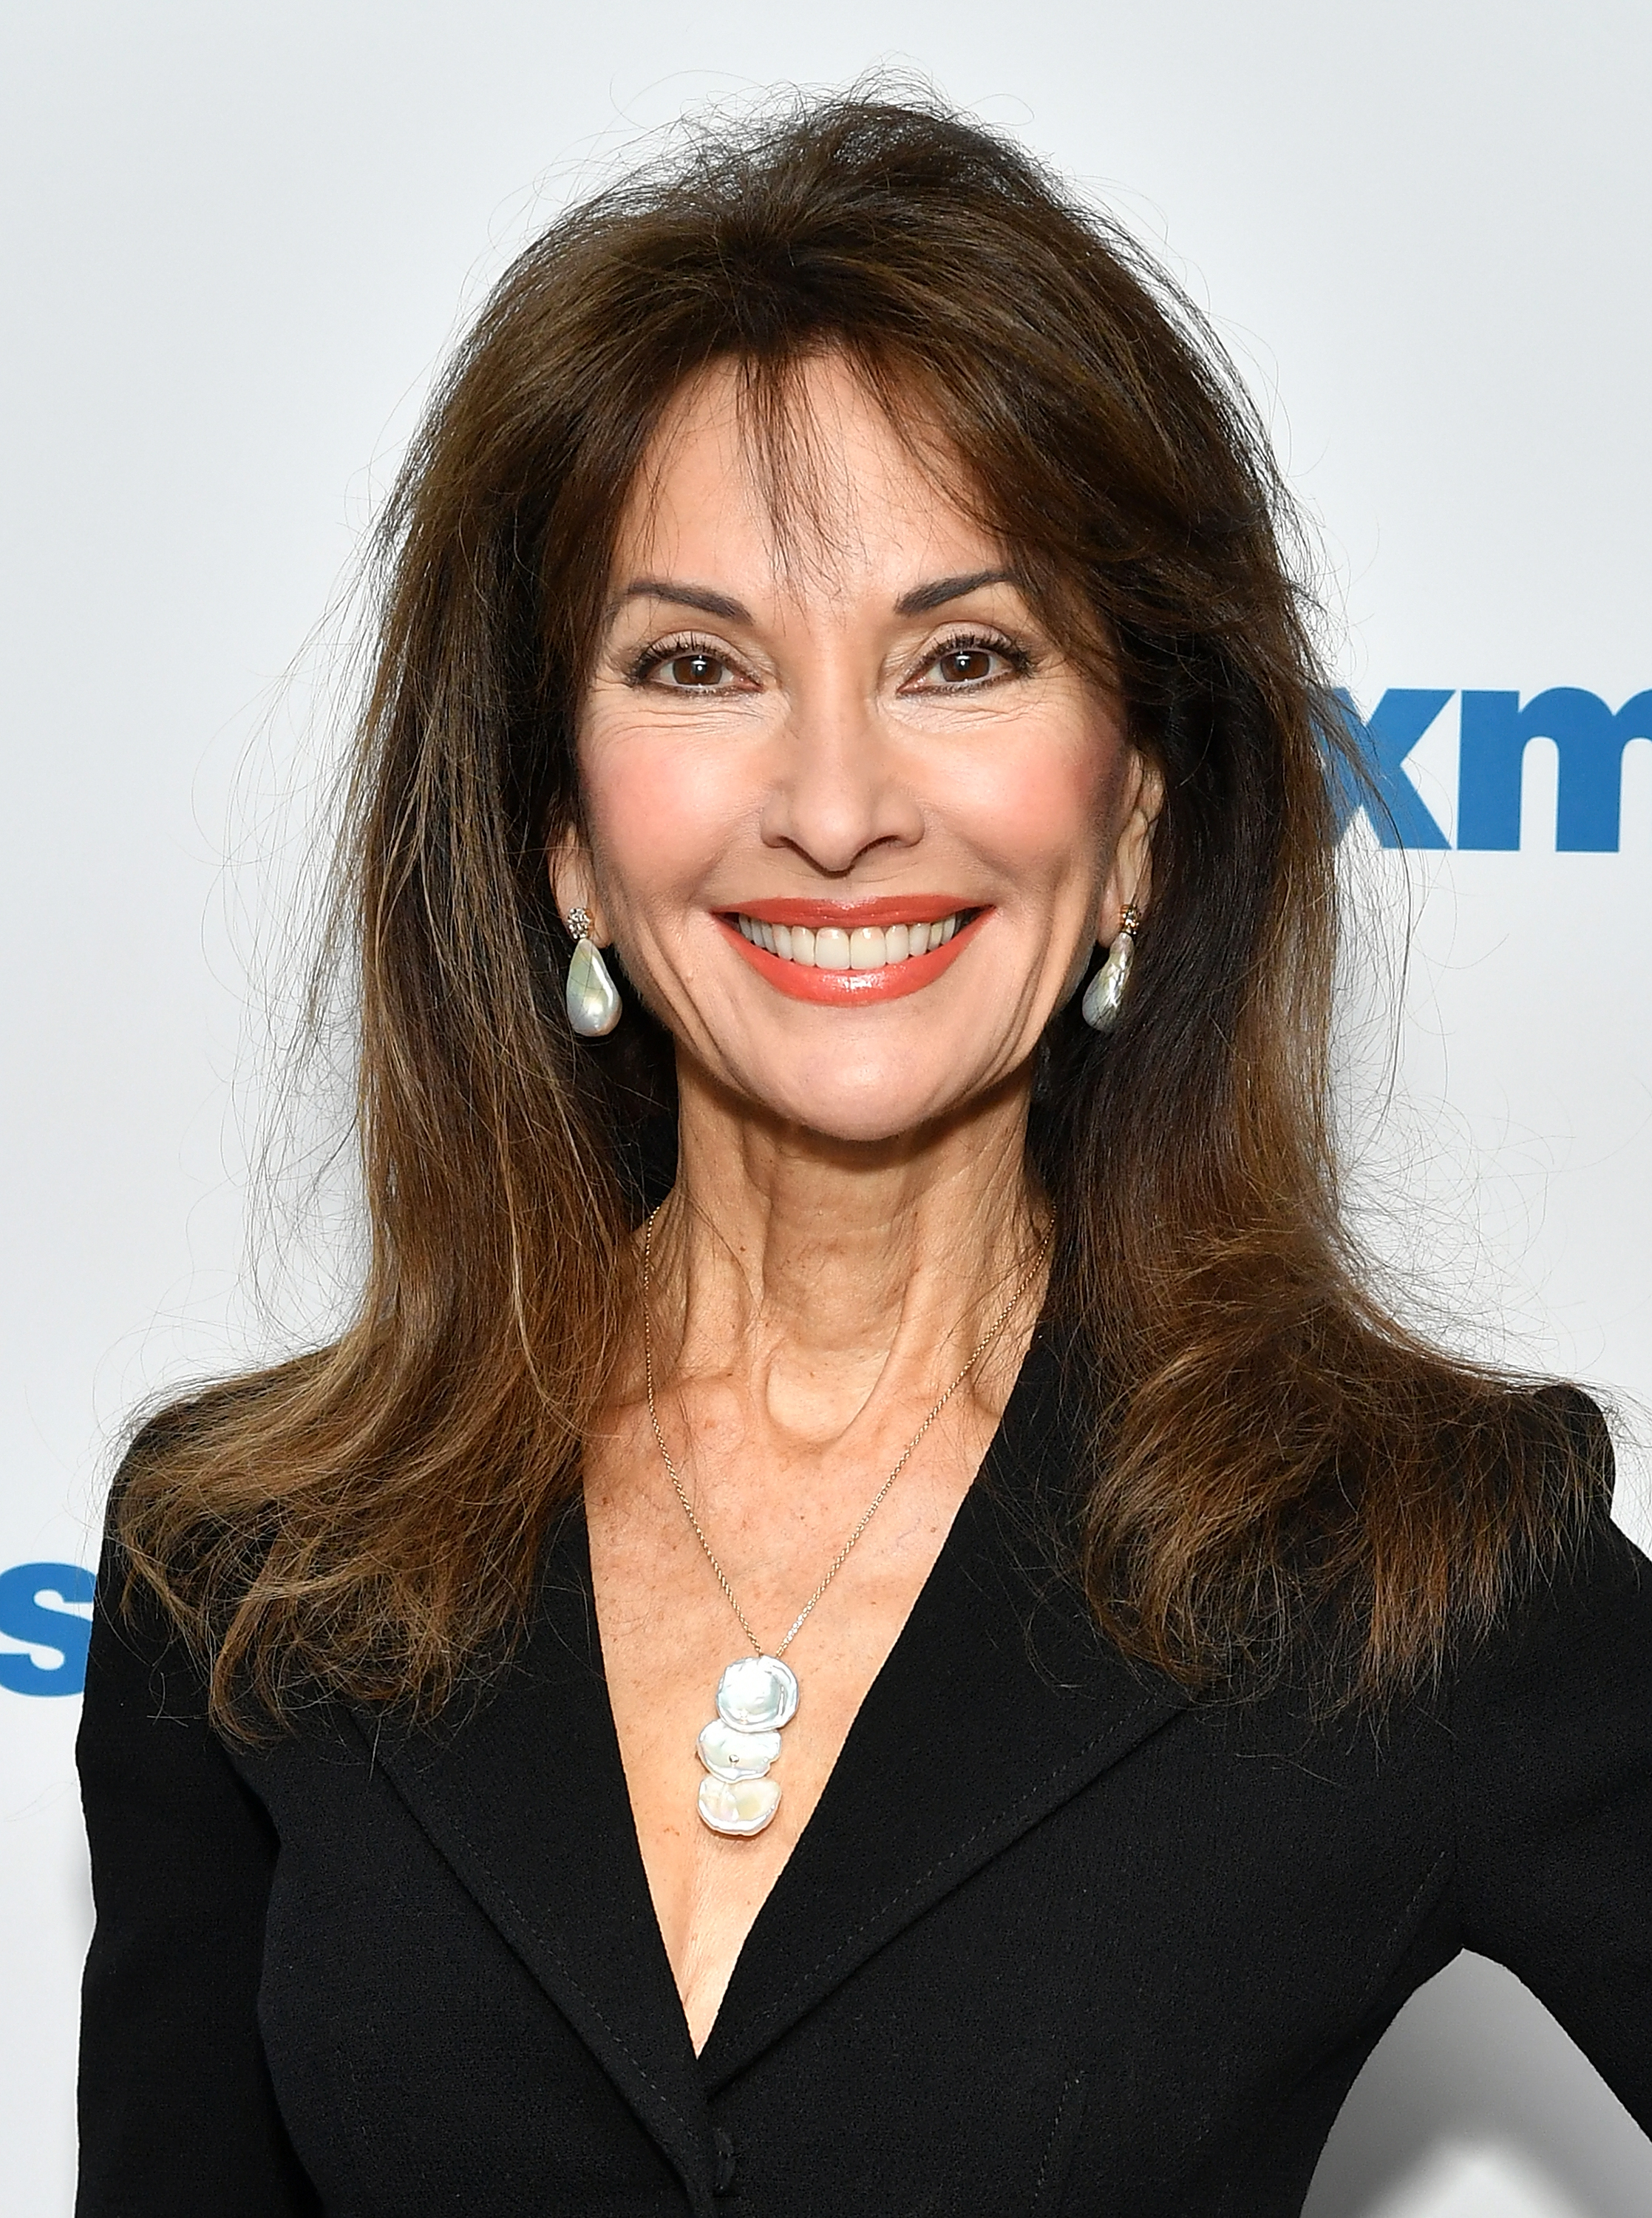 Susan Lucci visits SiriusXM Studios in New York City on April 5, 2019. | Source: Getty Images